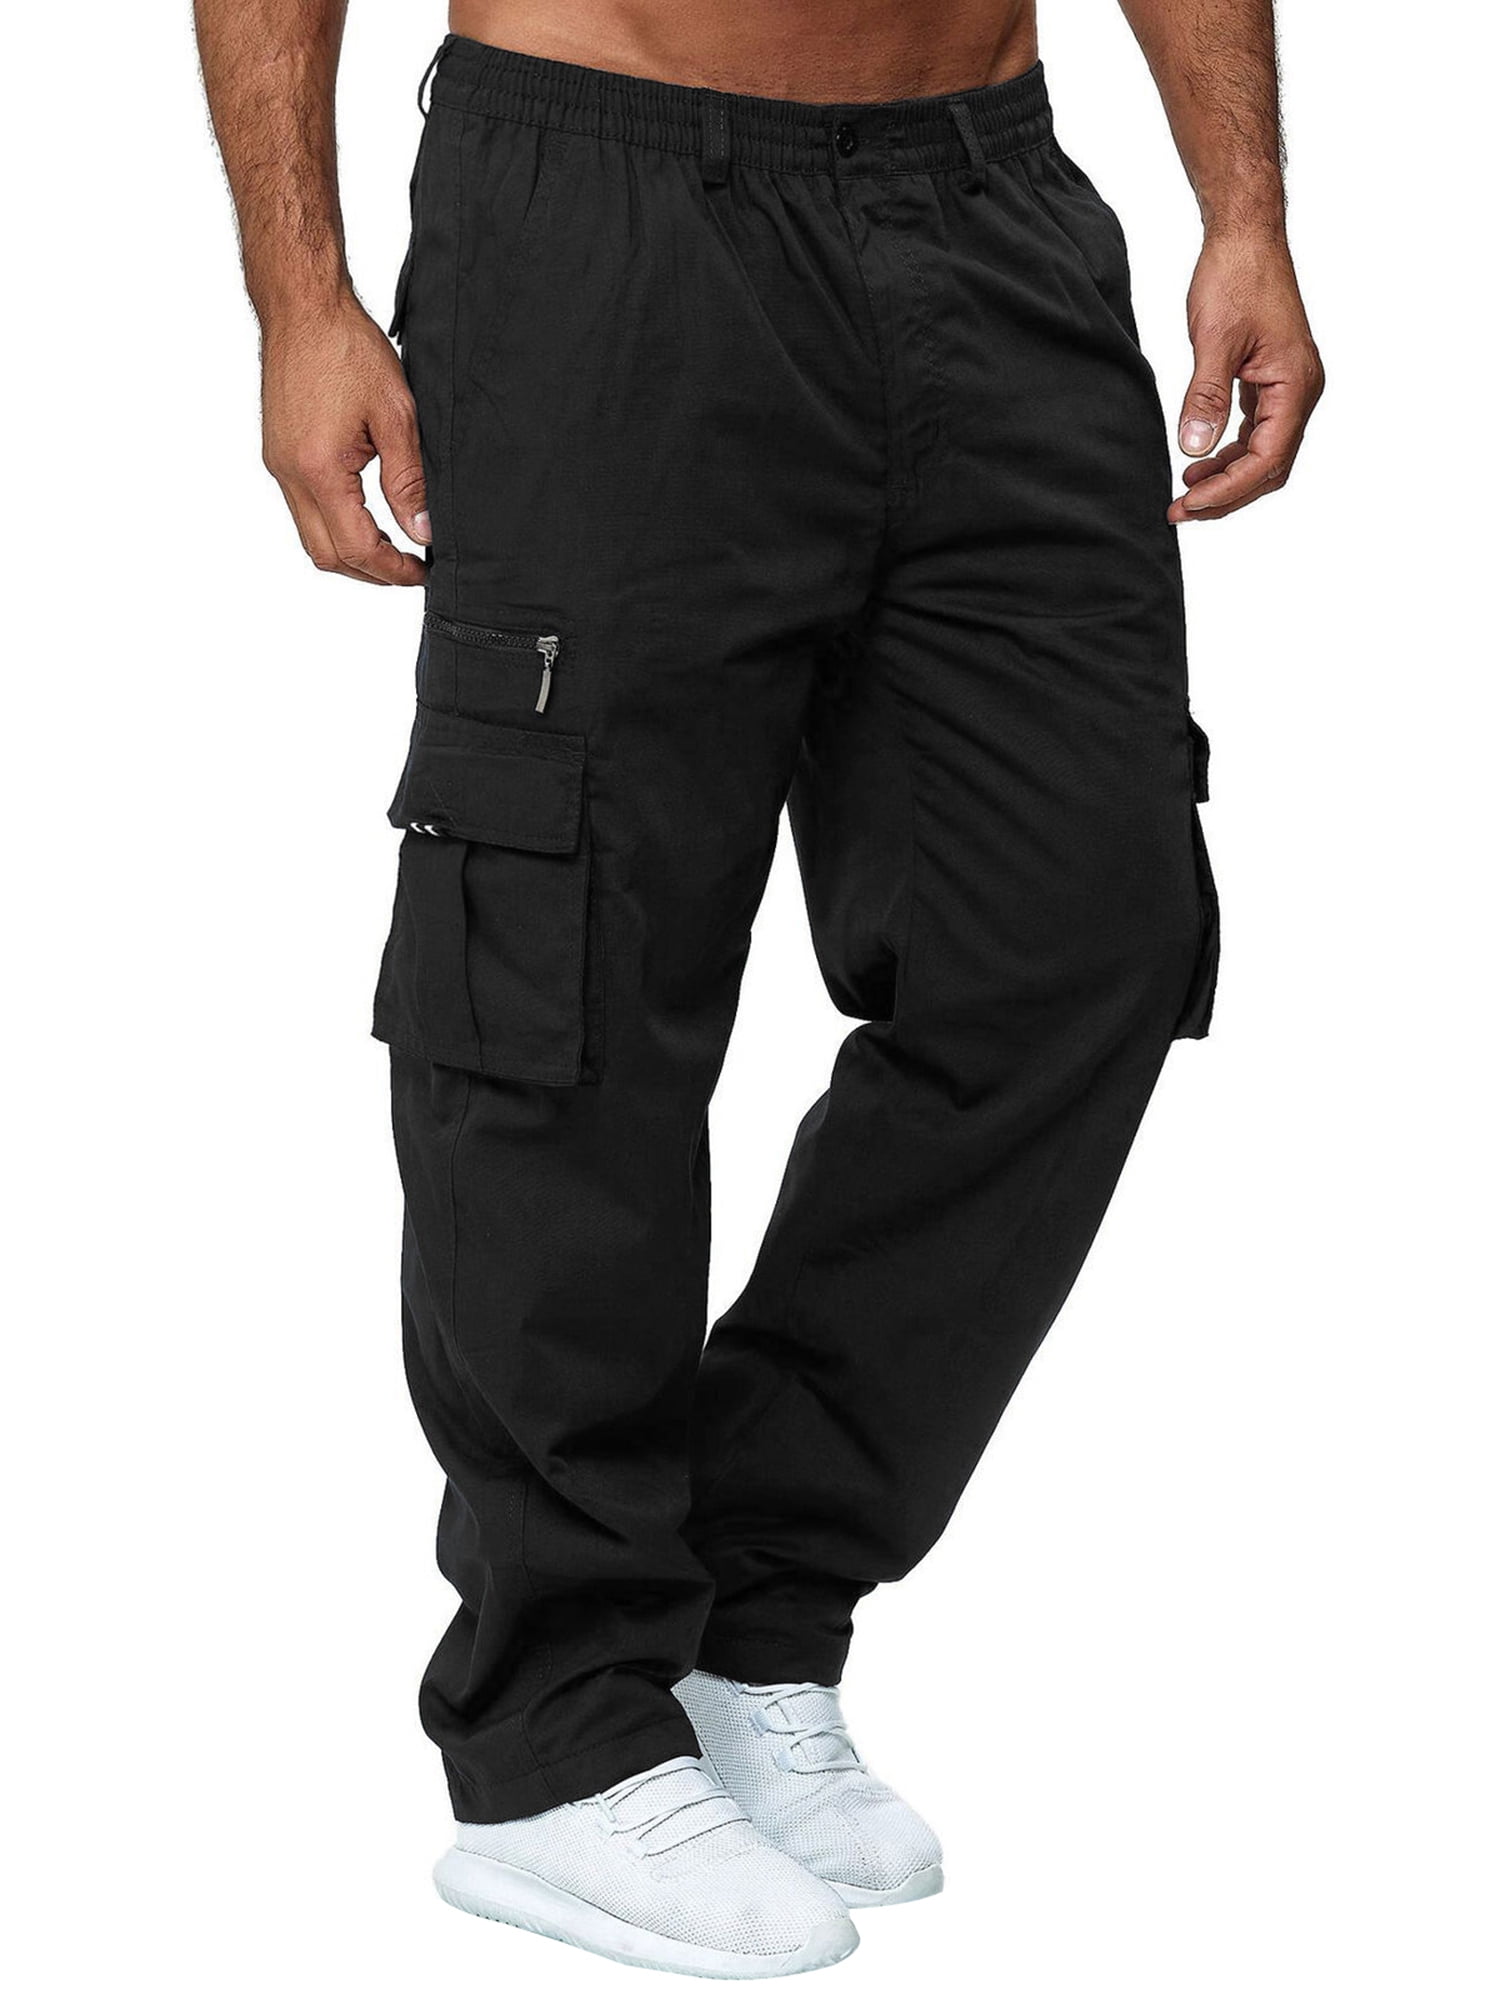 Kupretty Men's Relaxed Fit Cargo Pants Multi-Pockets Work Pants Casual ...